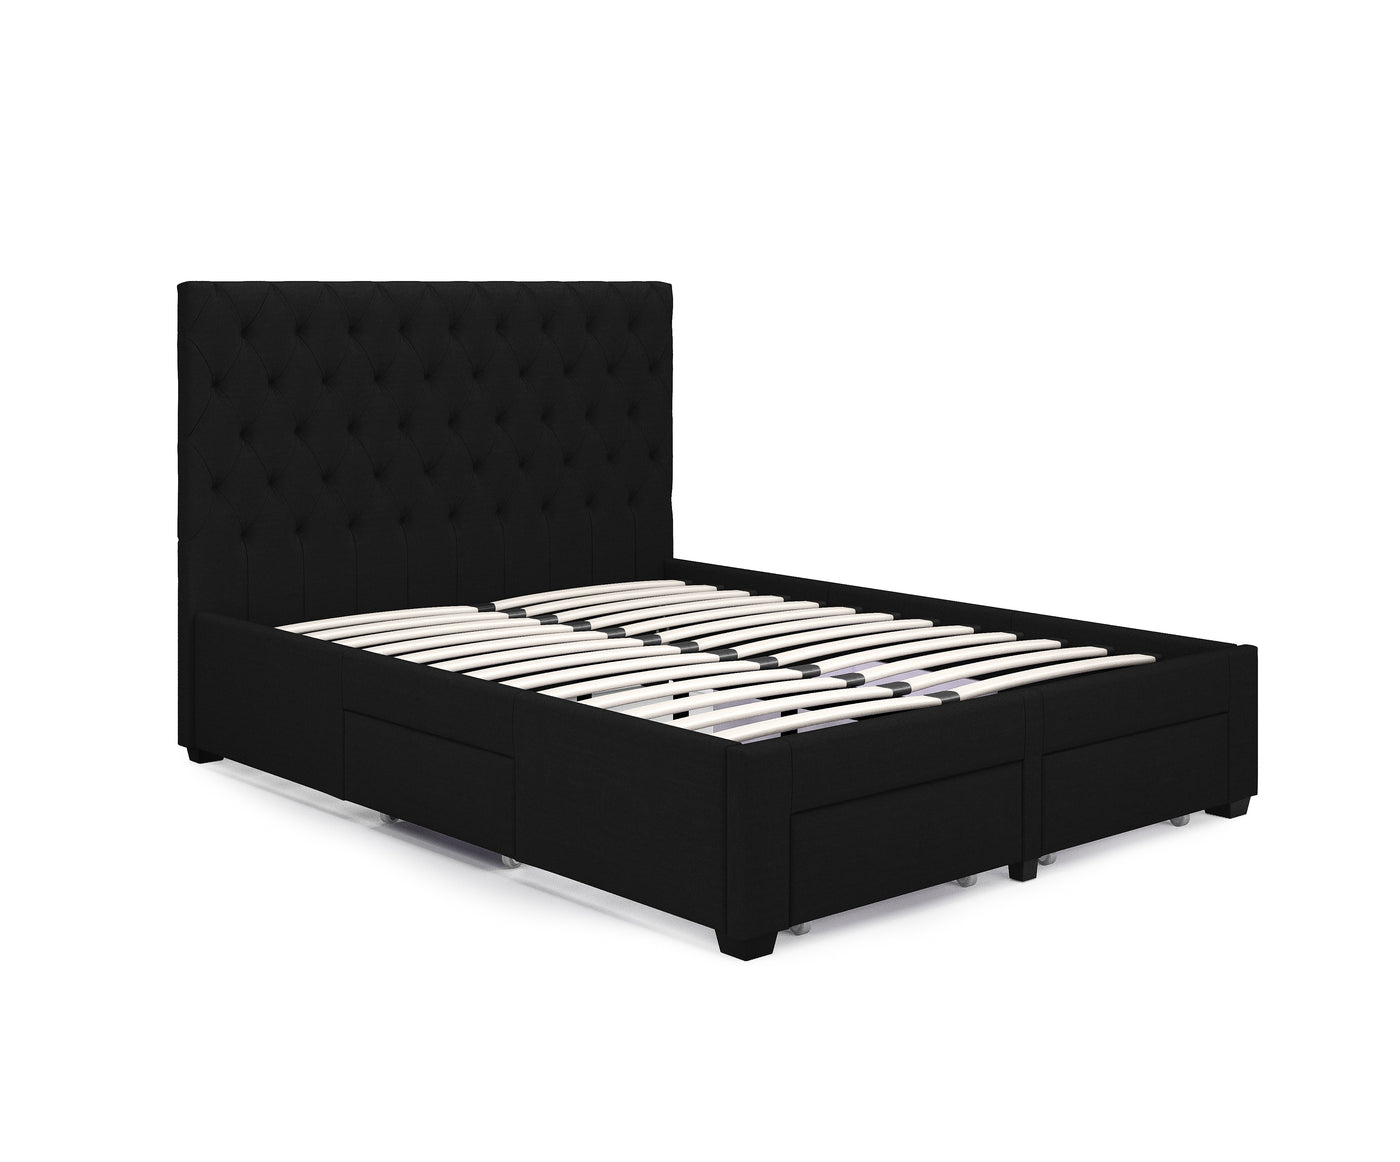 Zest 4 Drawer Storage Bed Frame (Black Fabric) and Royal Memory Foam Plush Mattress Combo Deal (7847526433022)